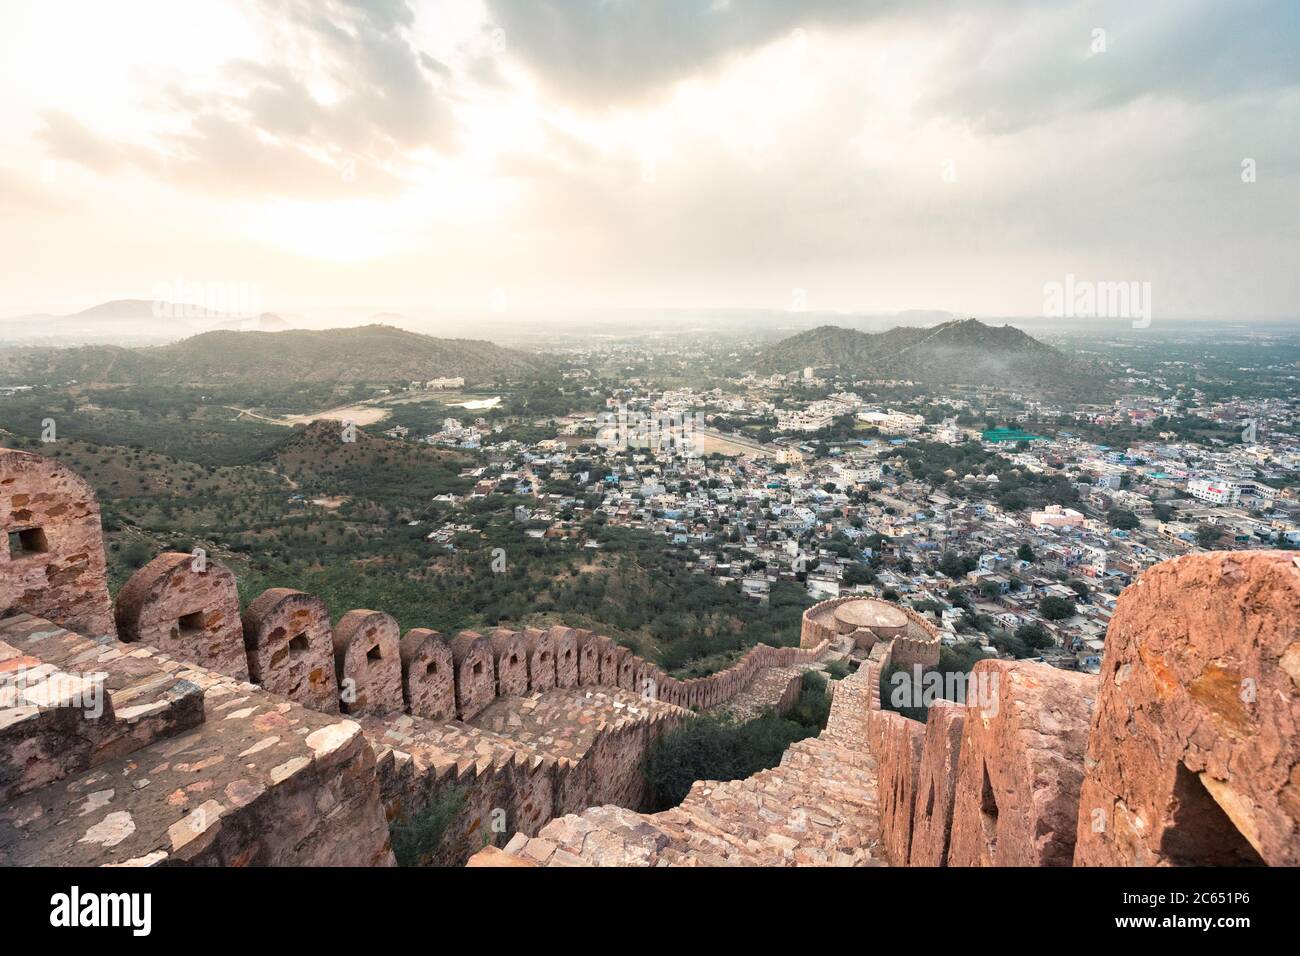 Walls of the fort in Jaipur overlooking the city during sunrise Stock Photo